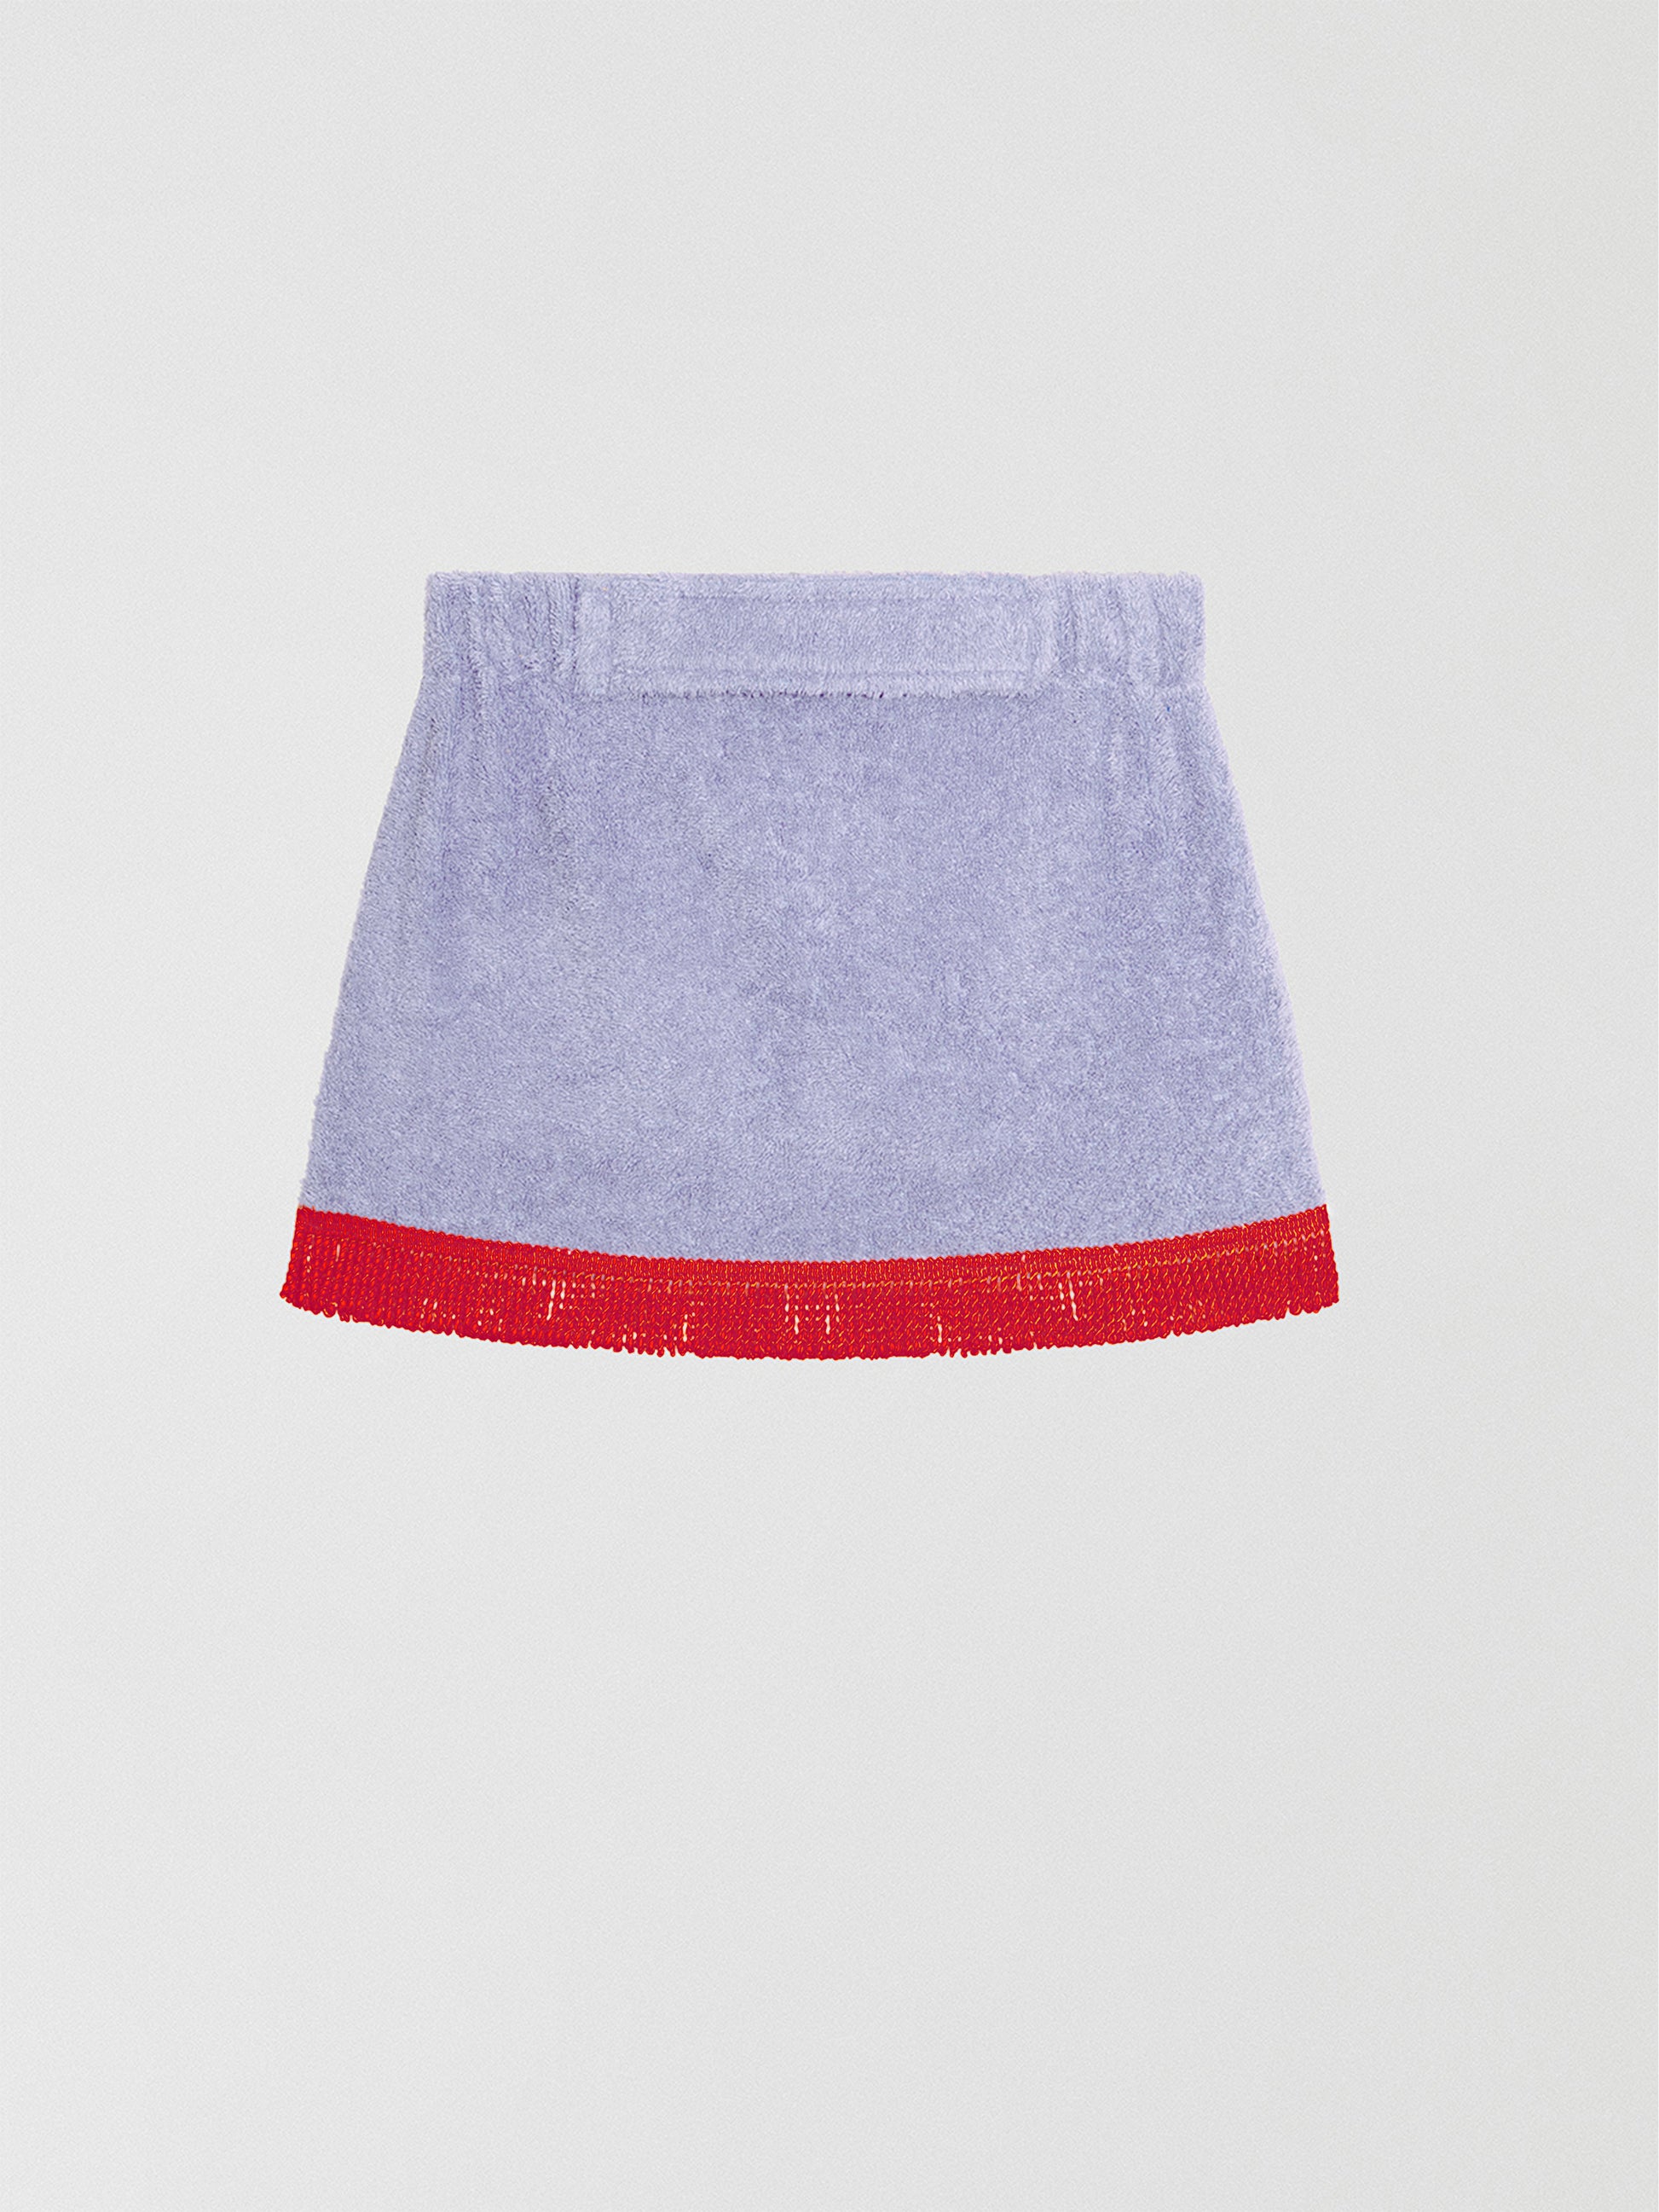 Towel mini skirt made in purple cotton with red fringes. 